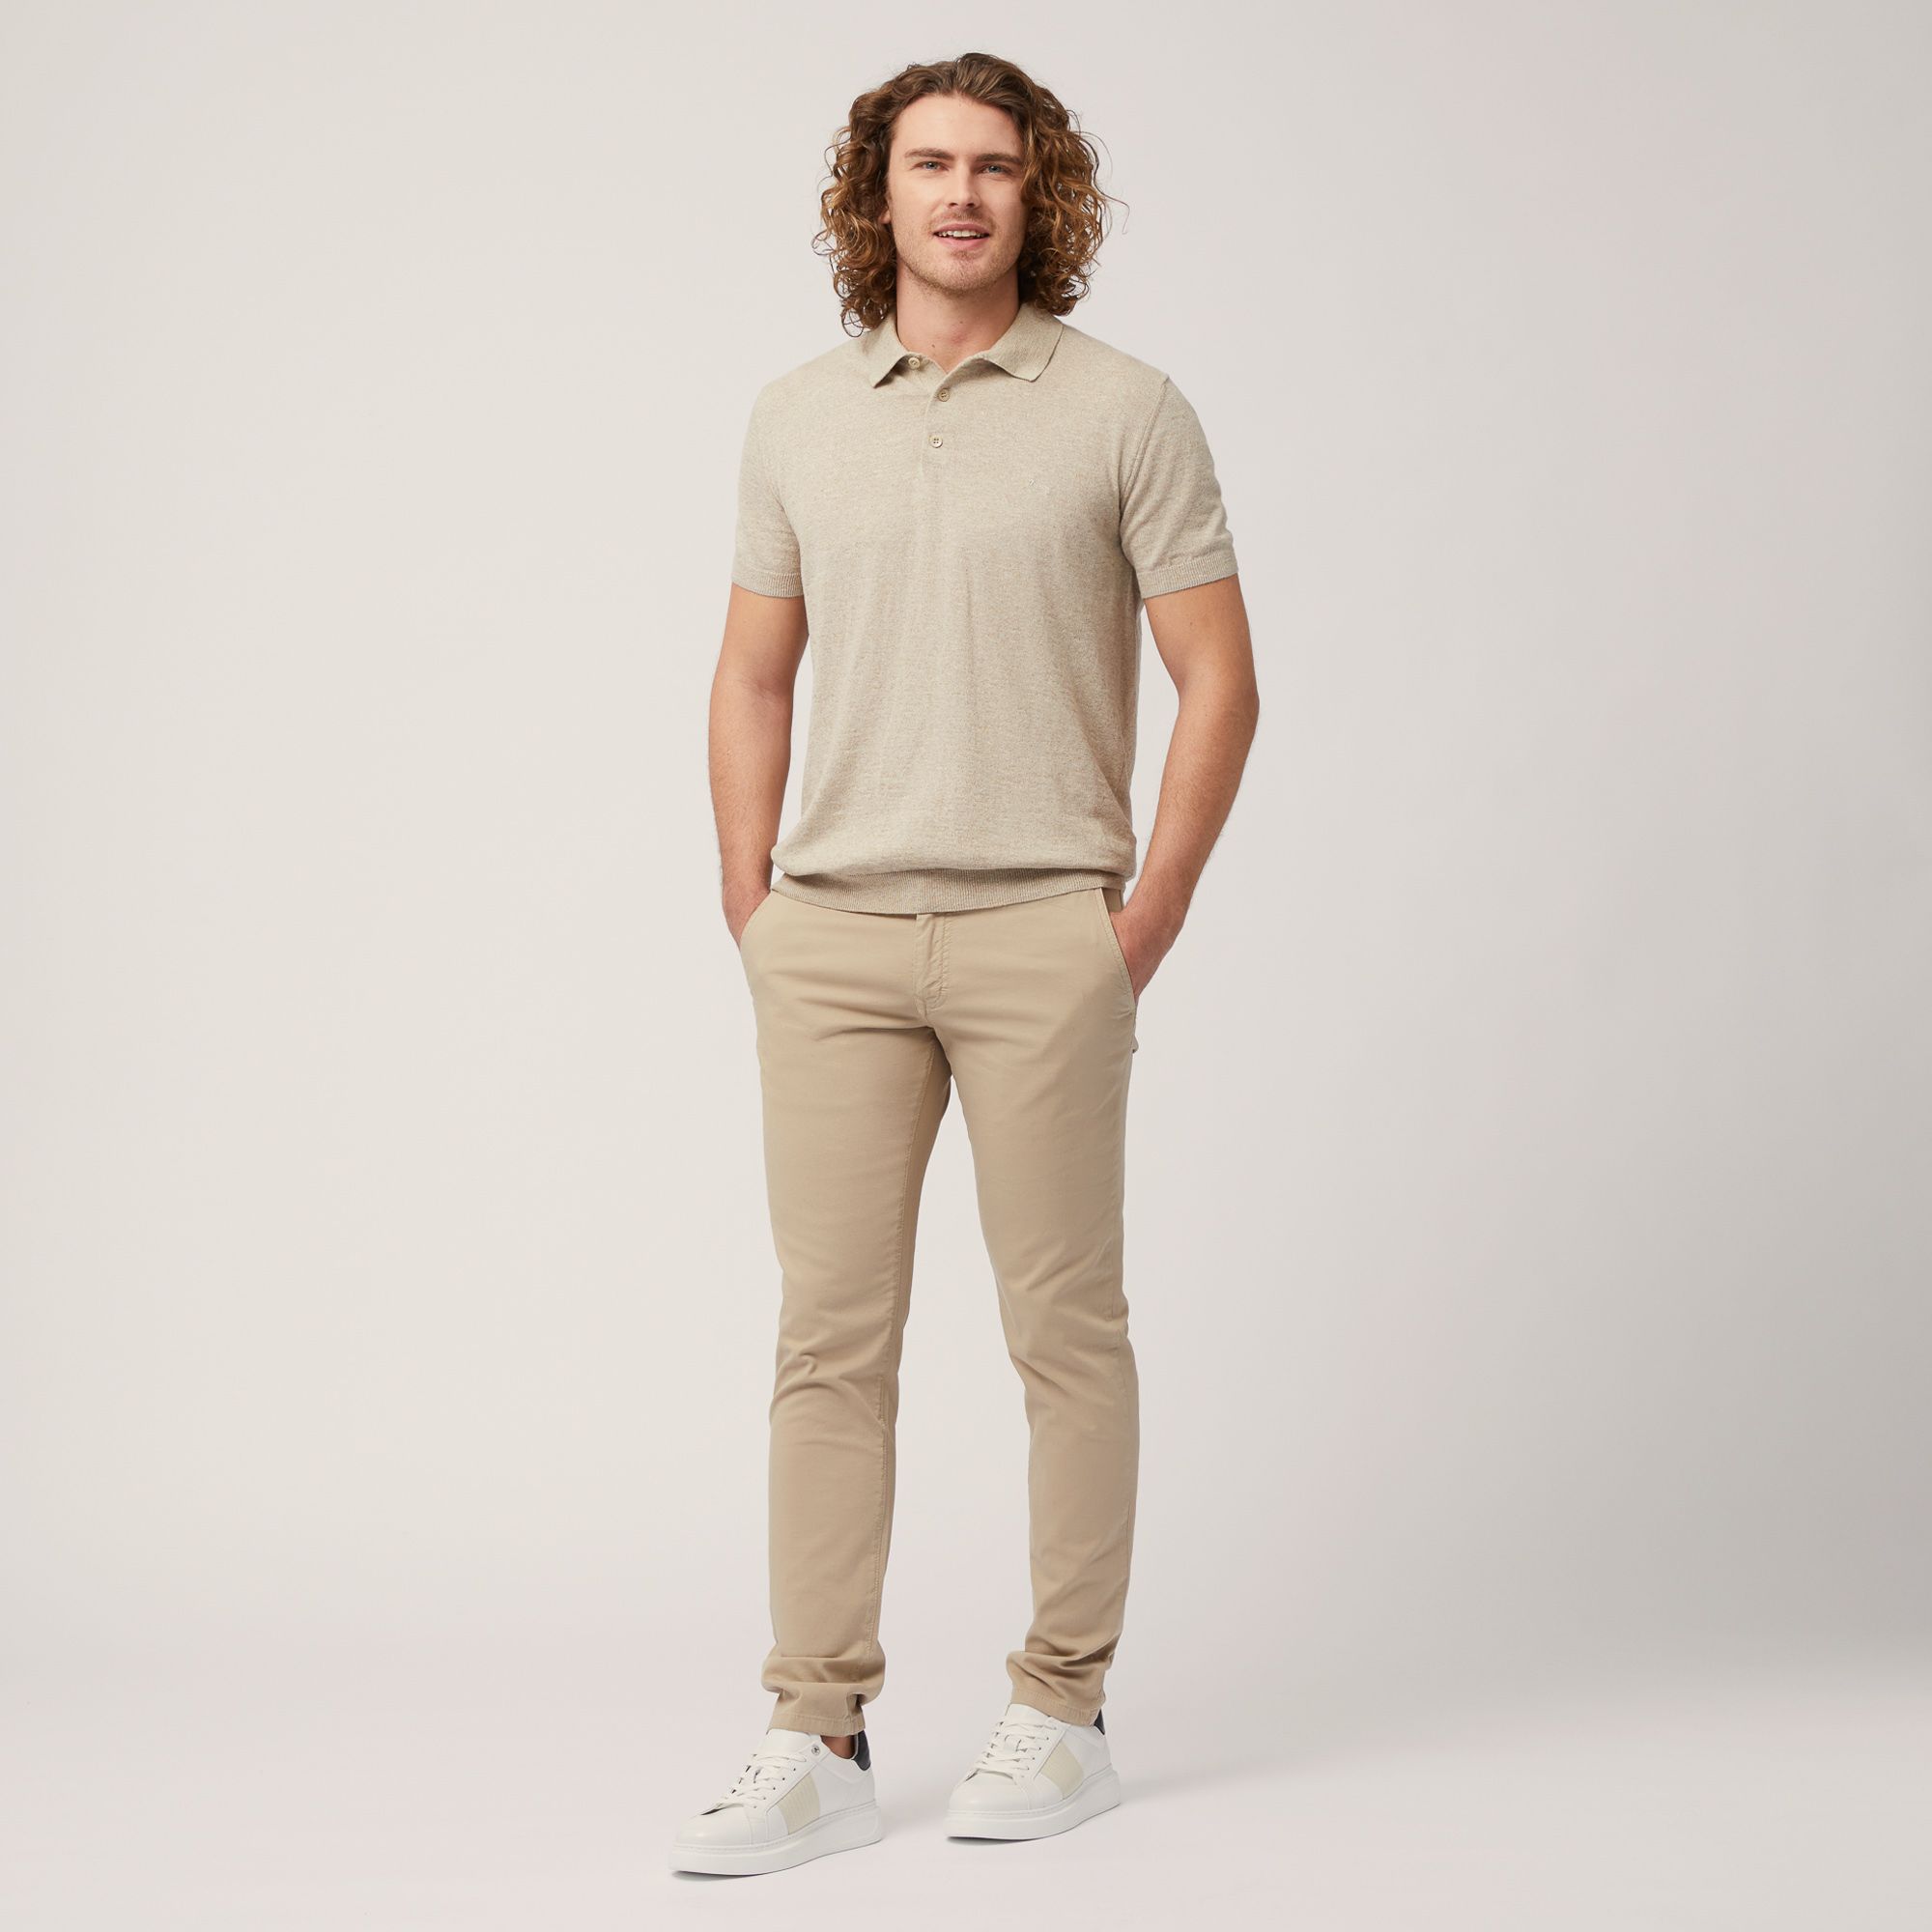 Cotton and Linen Tweed Polo, Beige, large image number 3